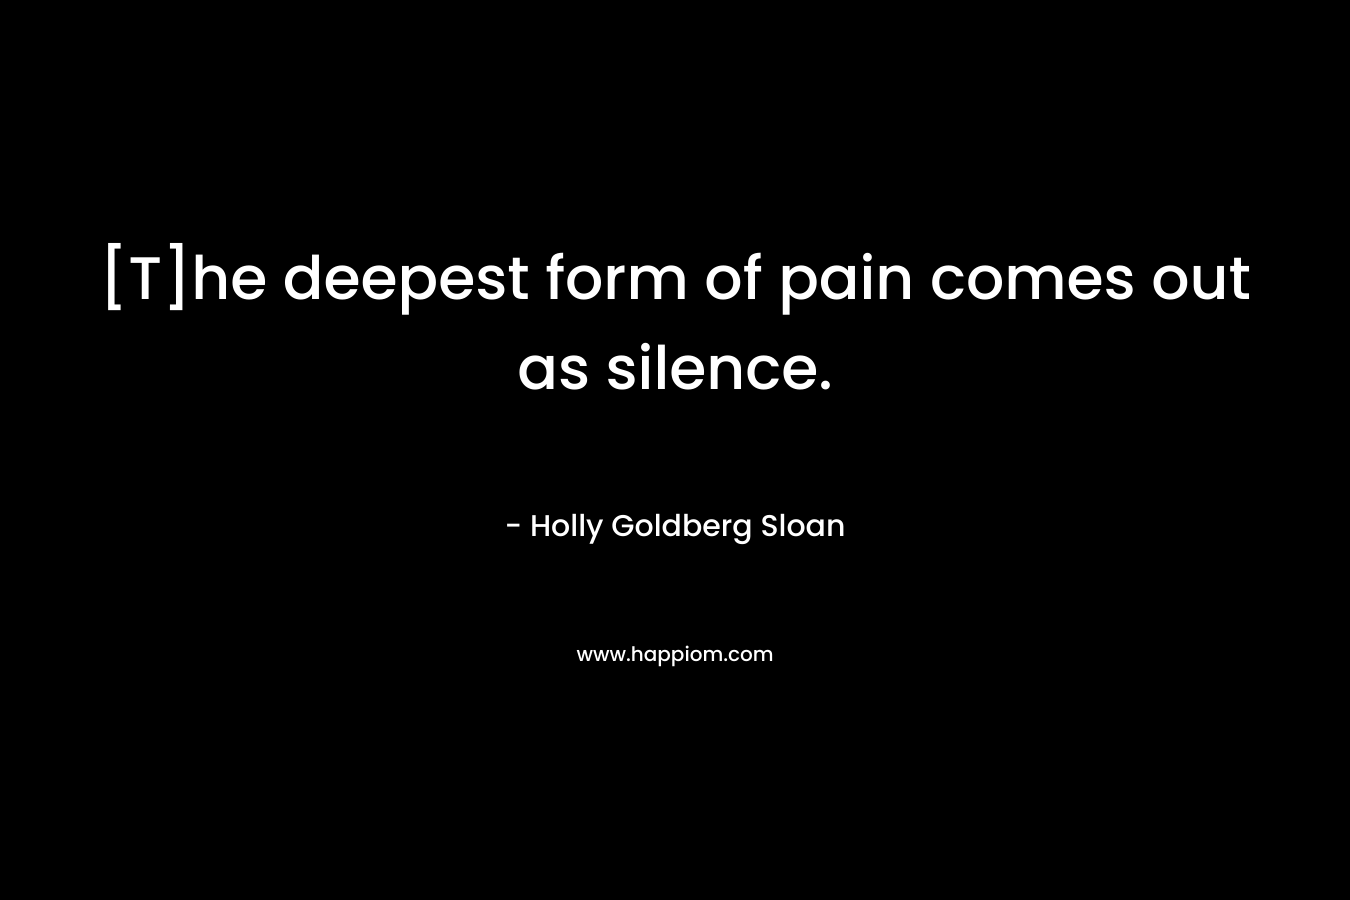 [T]he deepest form of pain comes out as silence. – Holly Goldberg Sloan